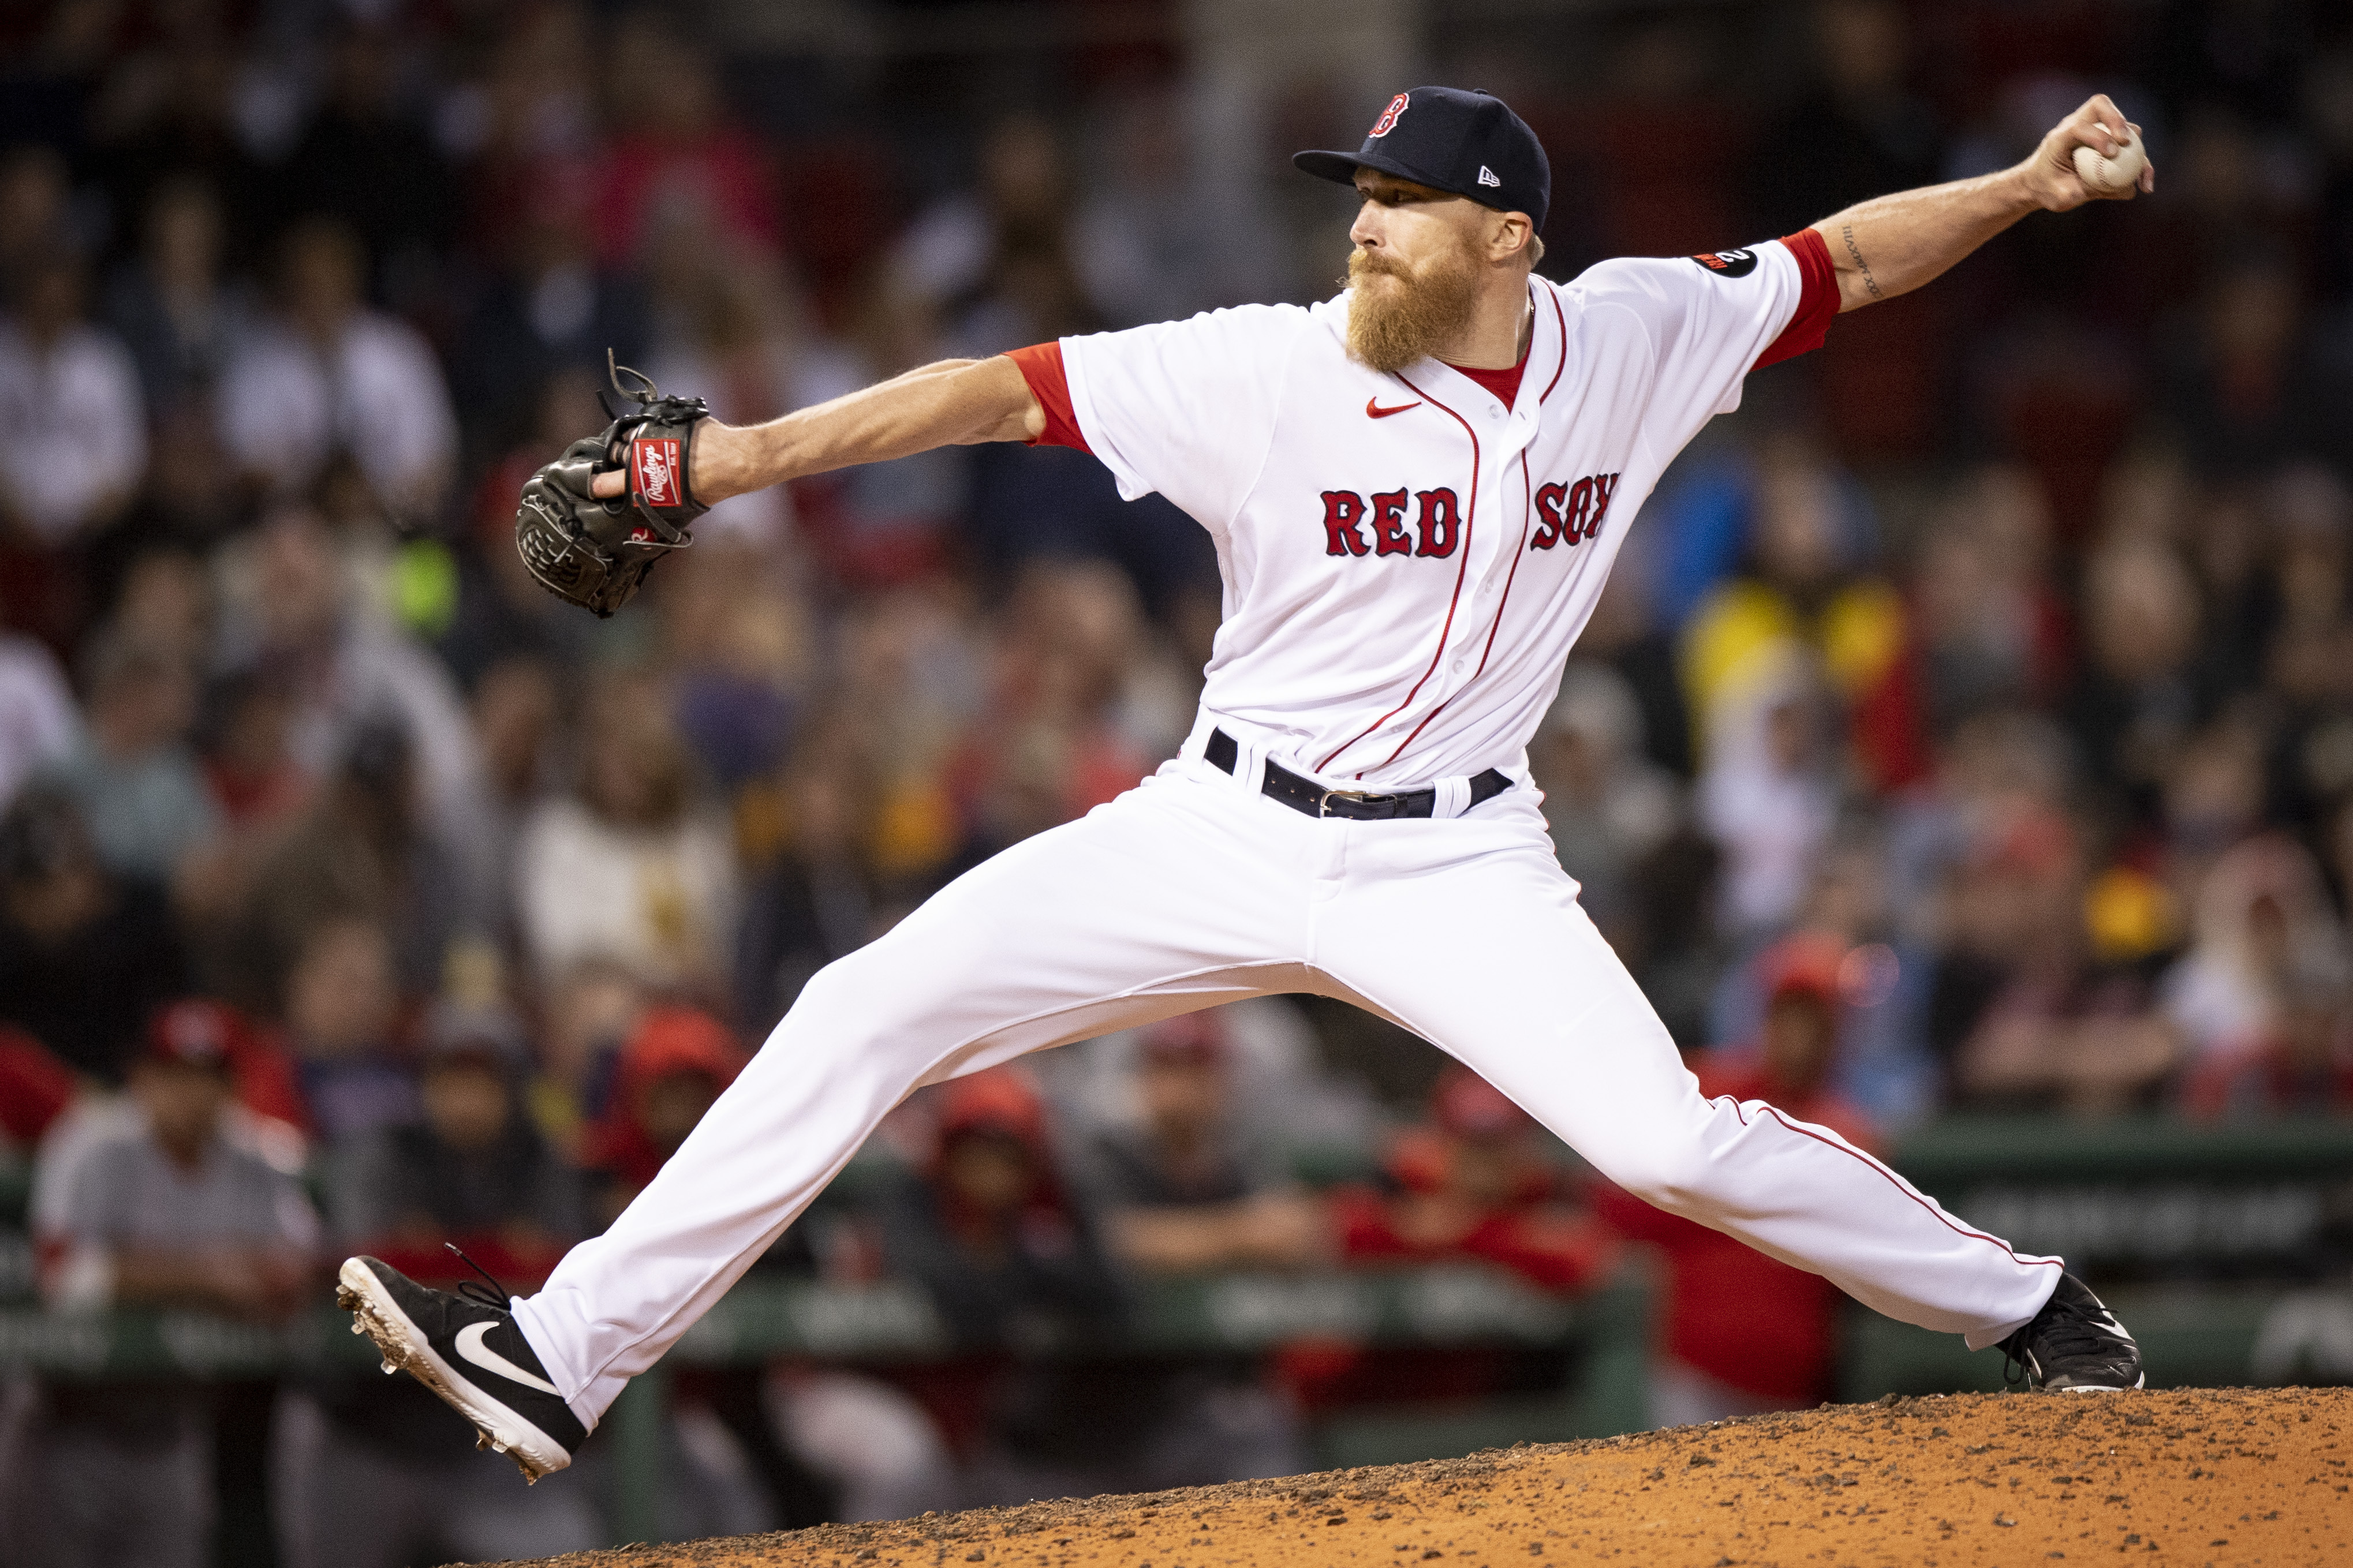 Red Sox Channel Becomes First RSN to Offer Standalone Streaming Service Next TV